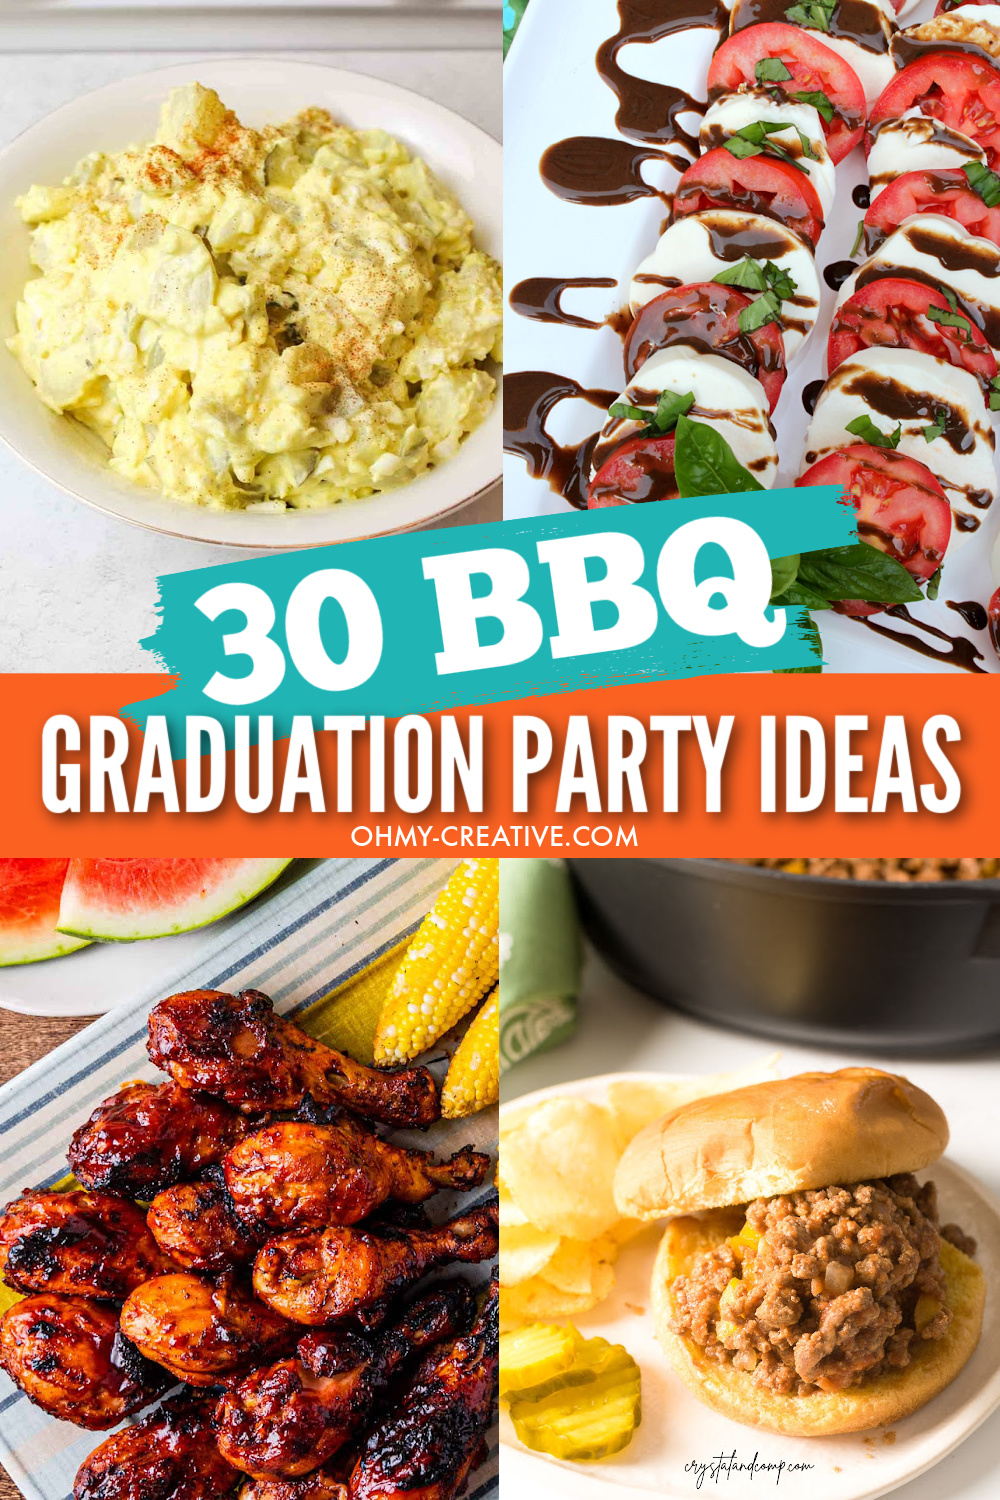 A collage of BBQ graduation party ideas and recipes. Including chicken wings, pulled pork sandwiches, casseroles and salads.  